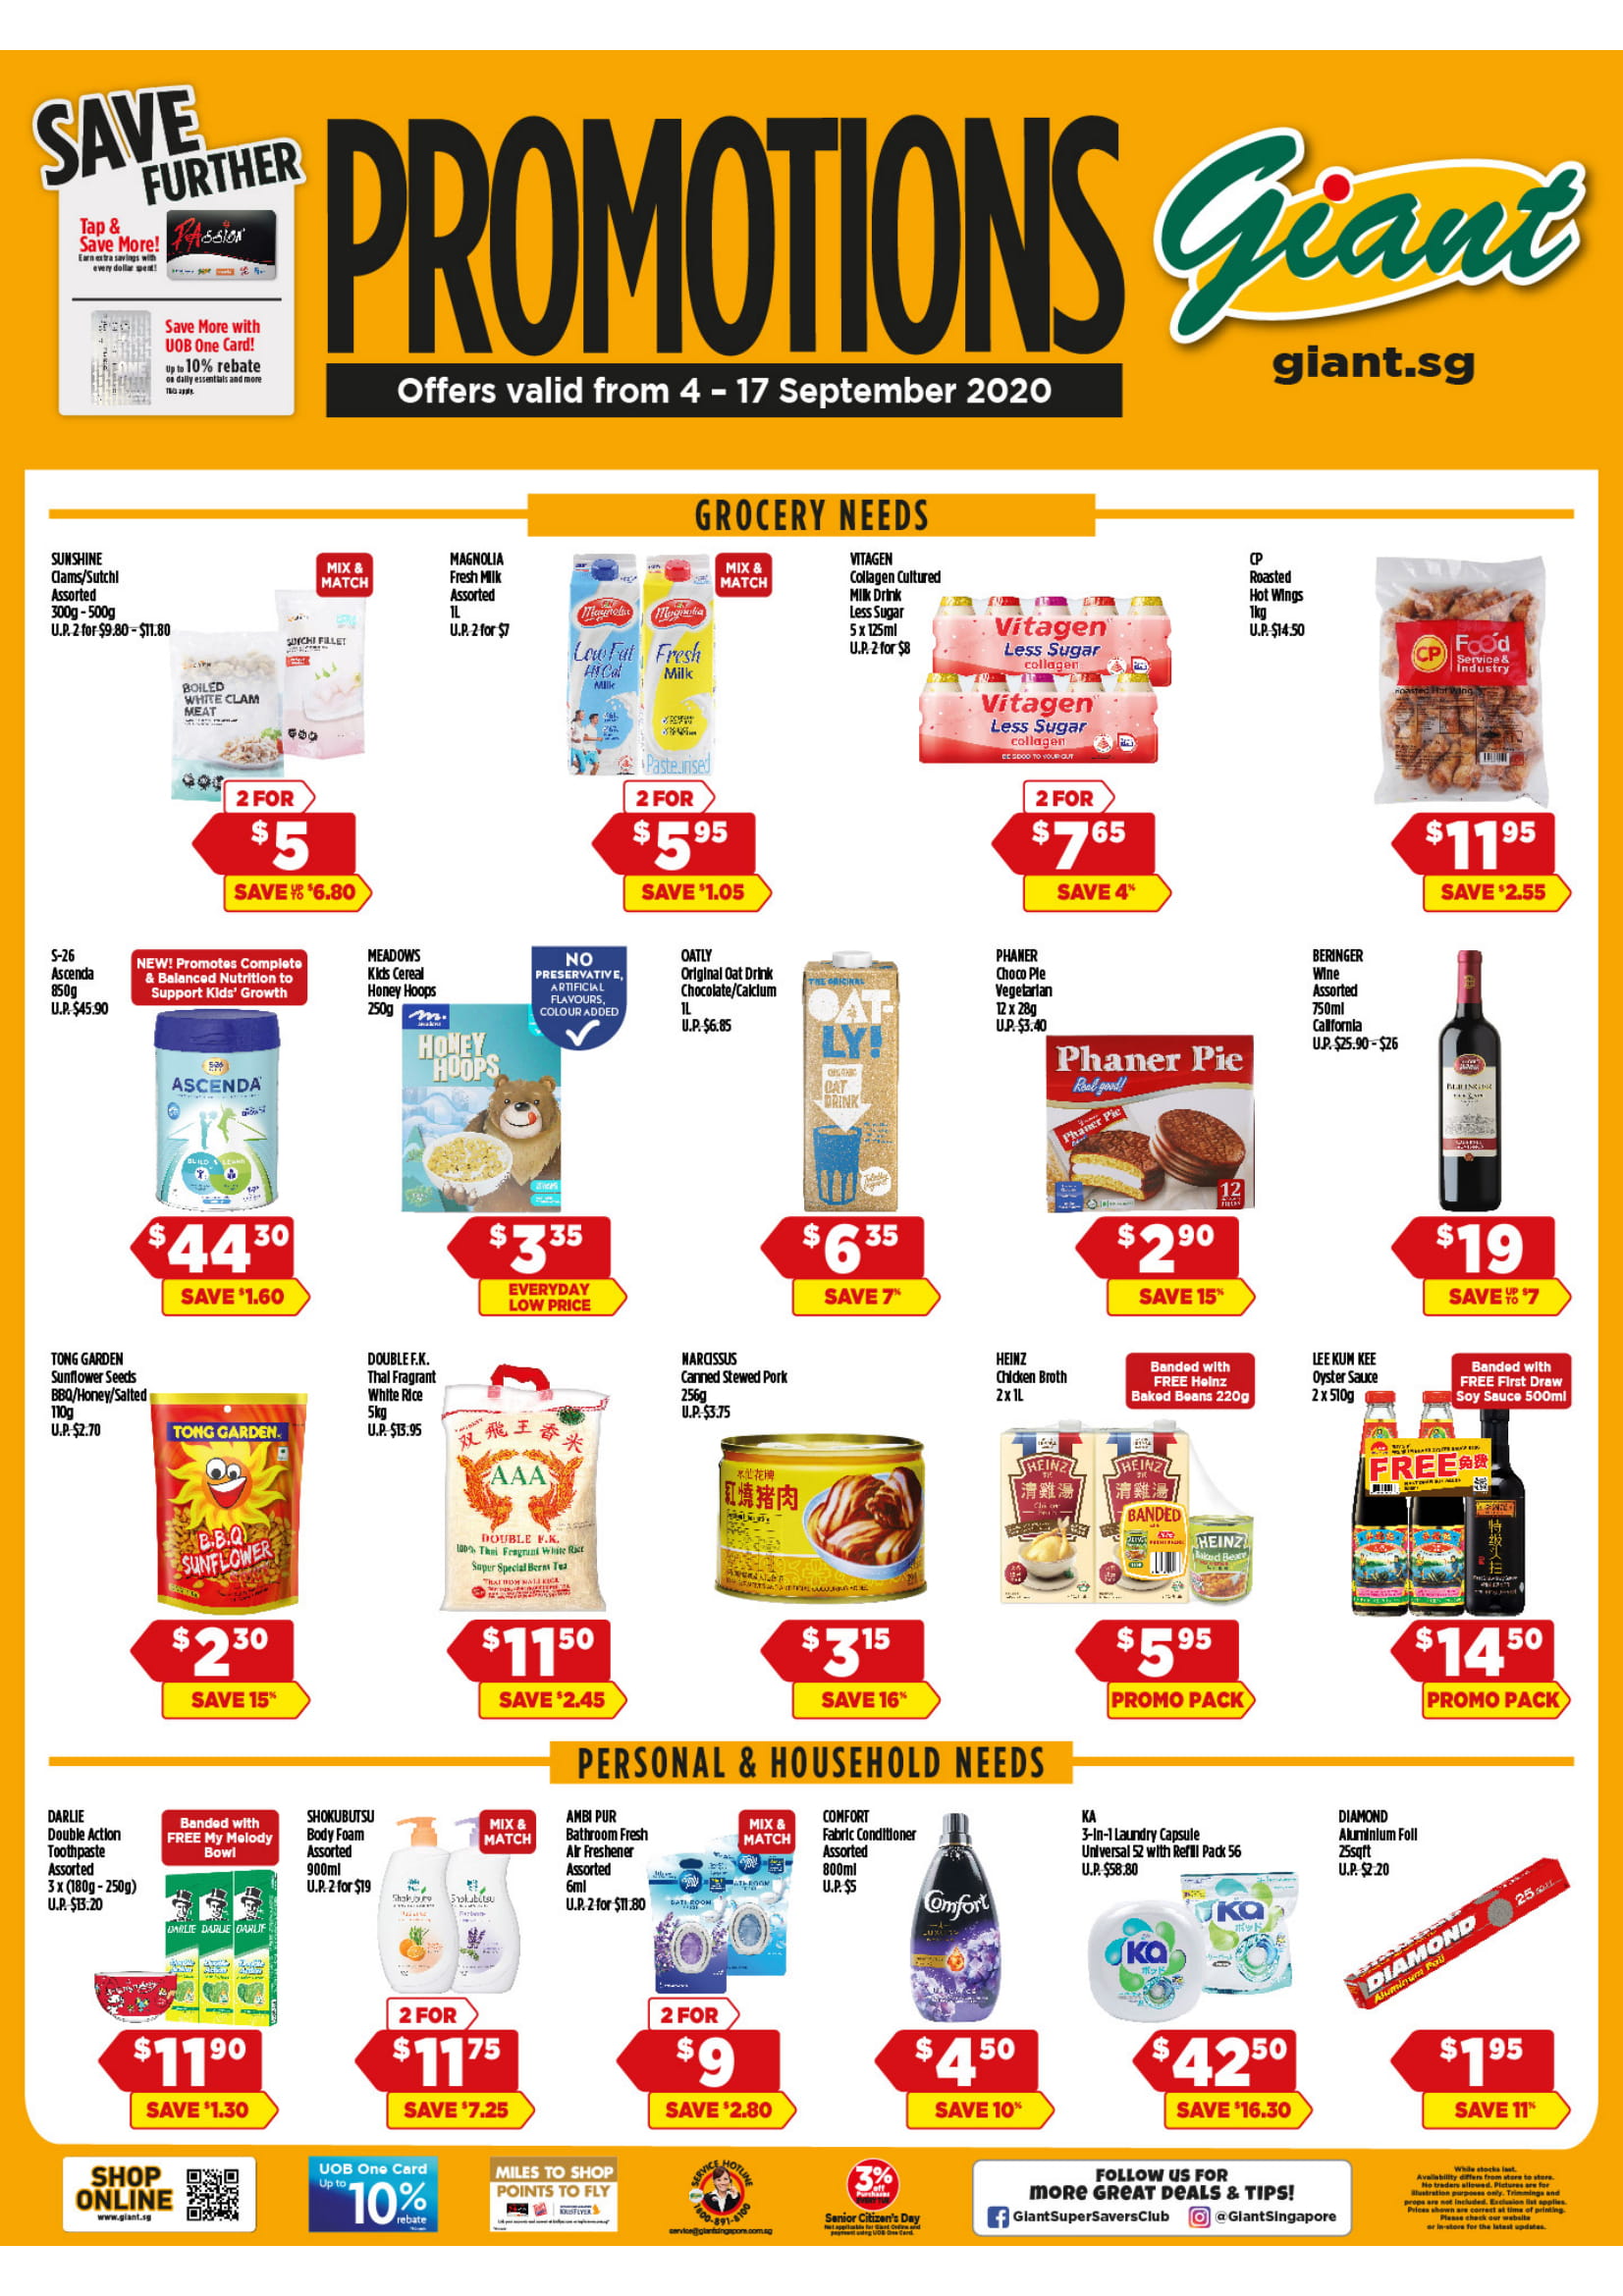 Giant promotions from 4 to 17 September